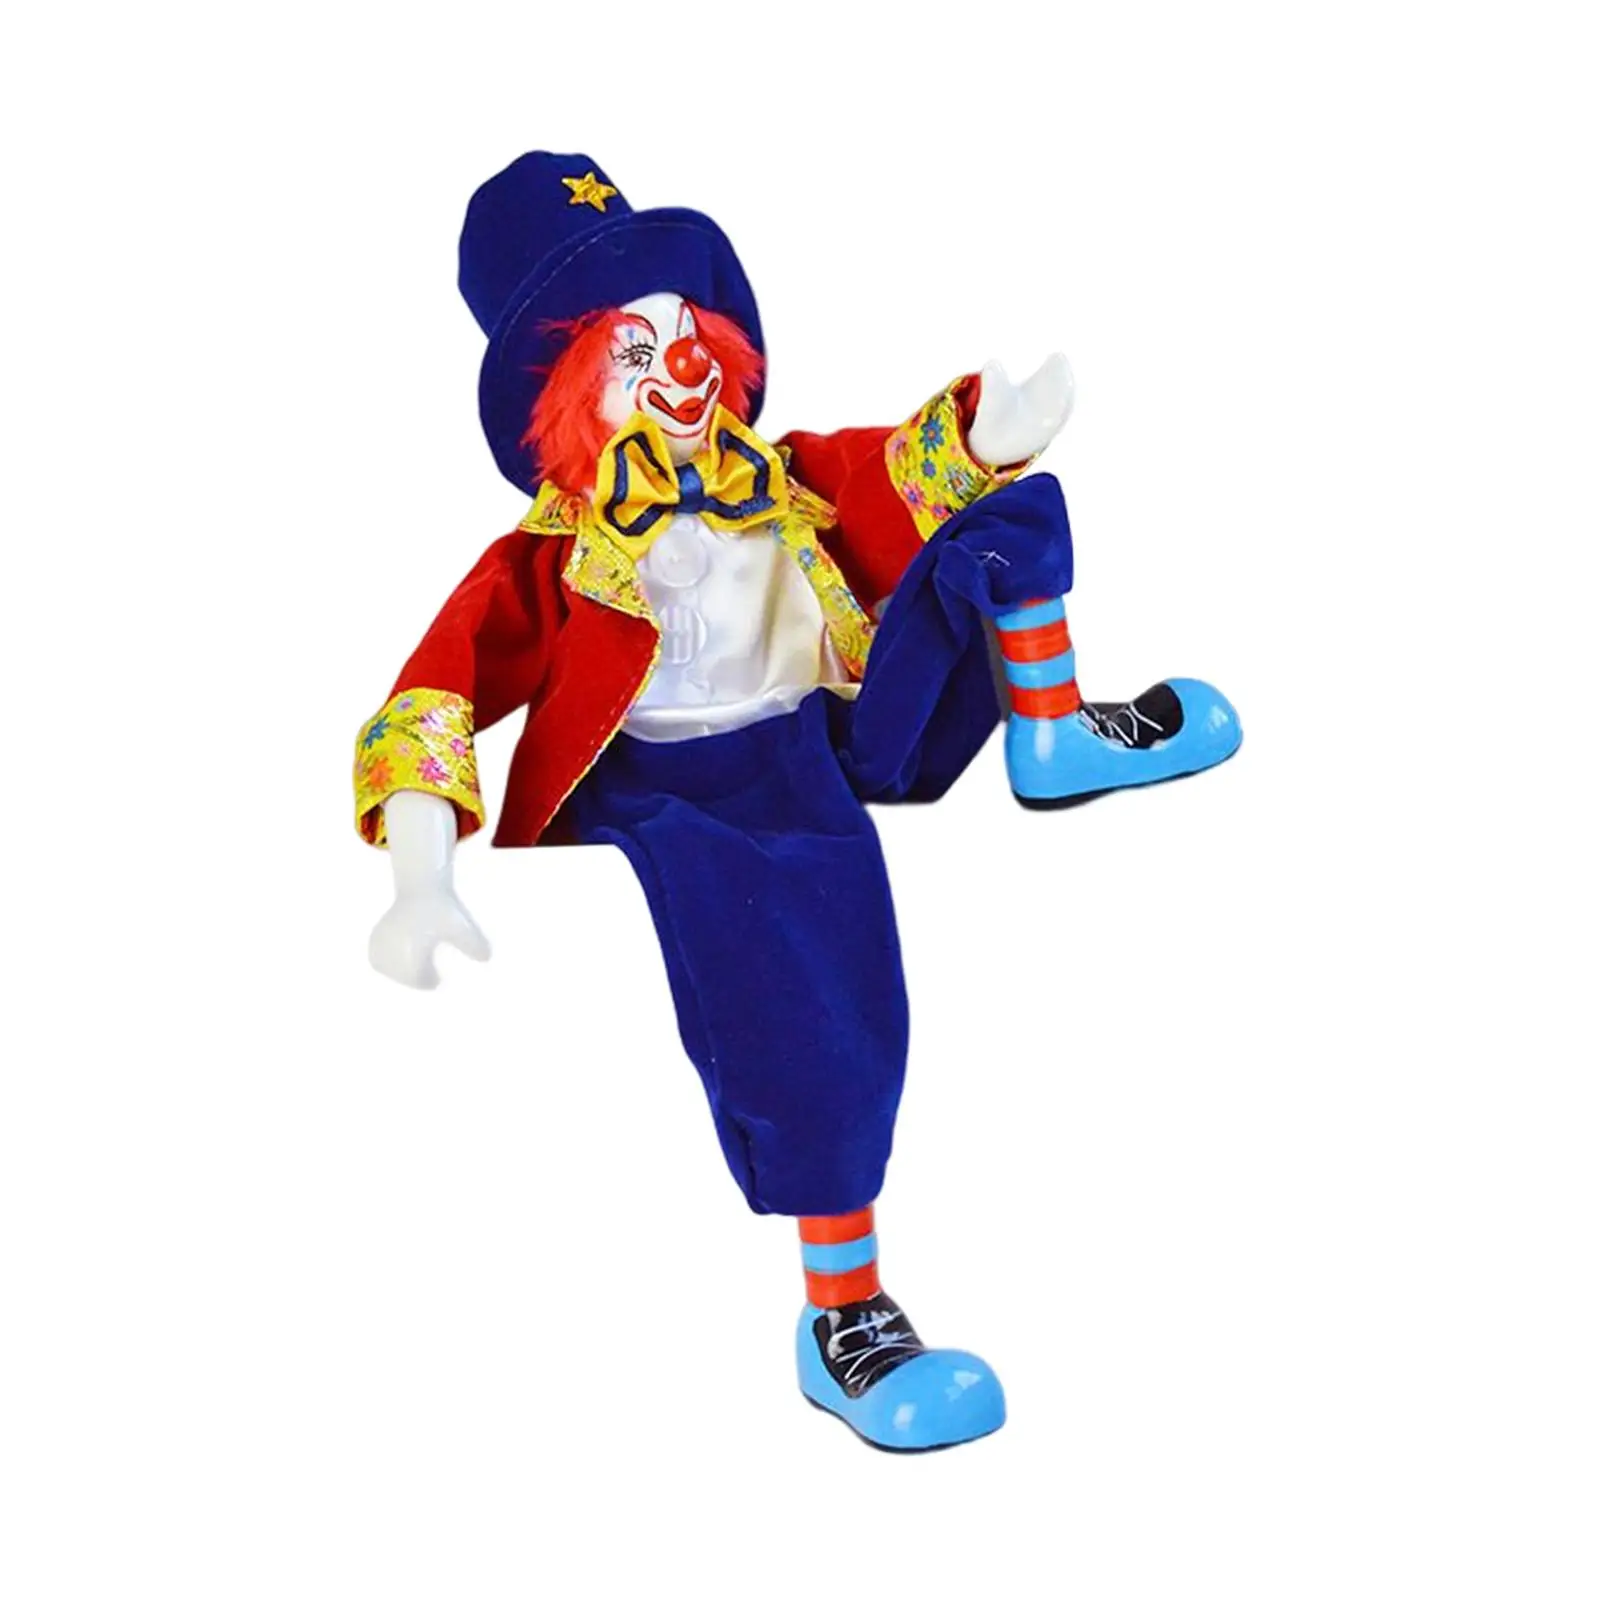 43cm Clown Stuffed Doll Funny Action Figure for Bedroom Tabletop Festival